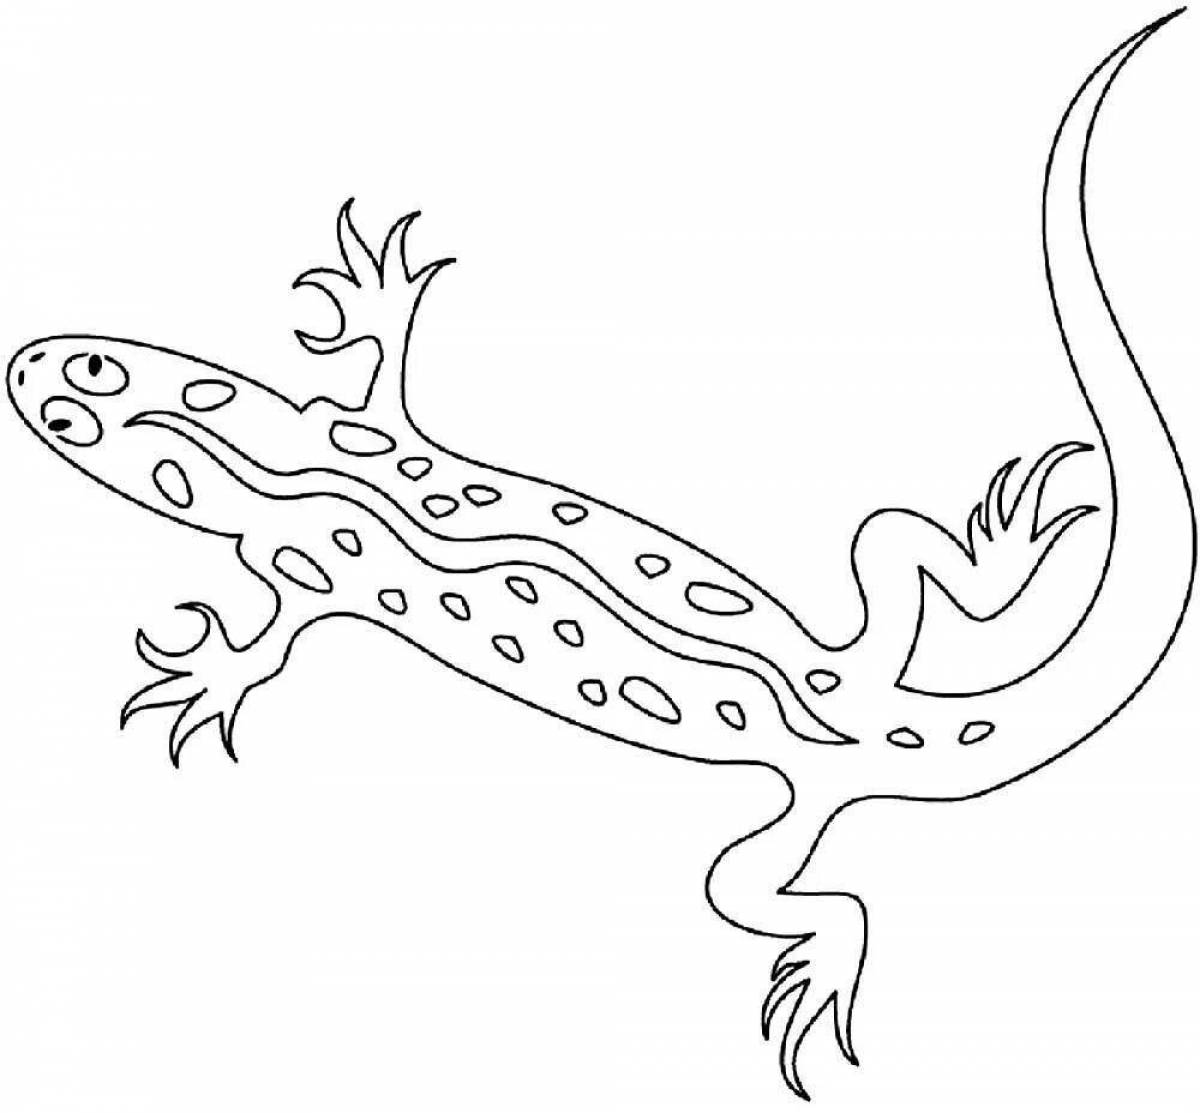 Creative lizard coloring book for kids